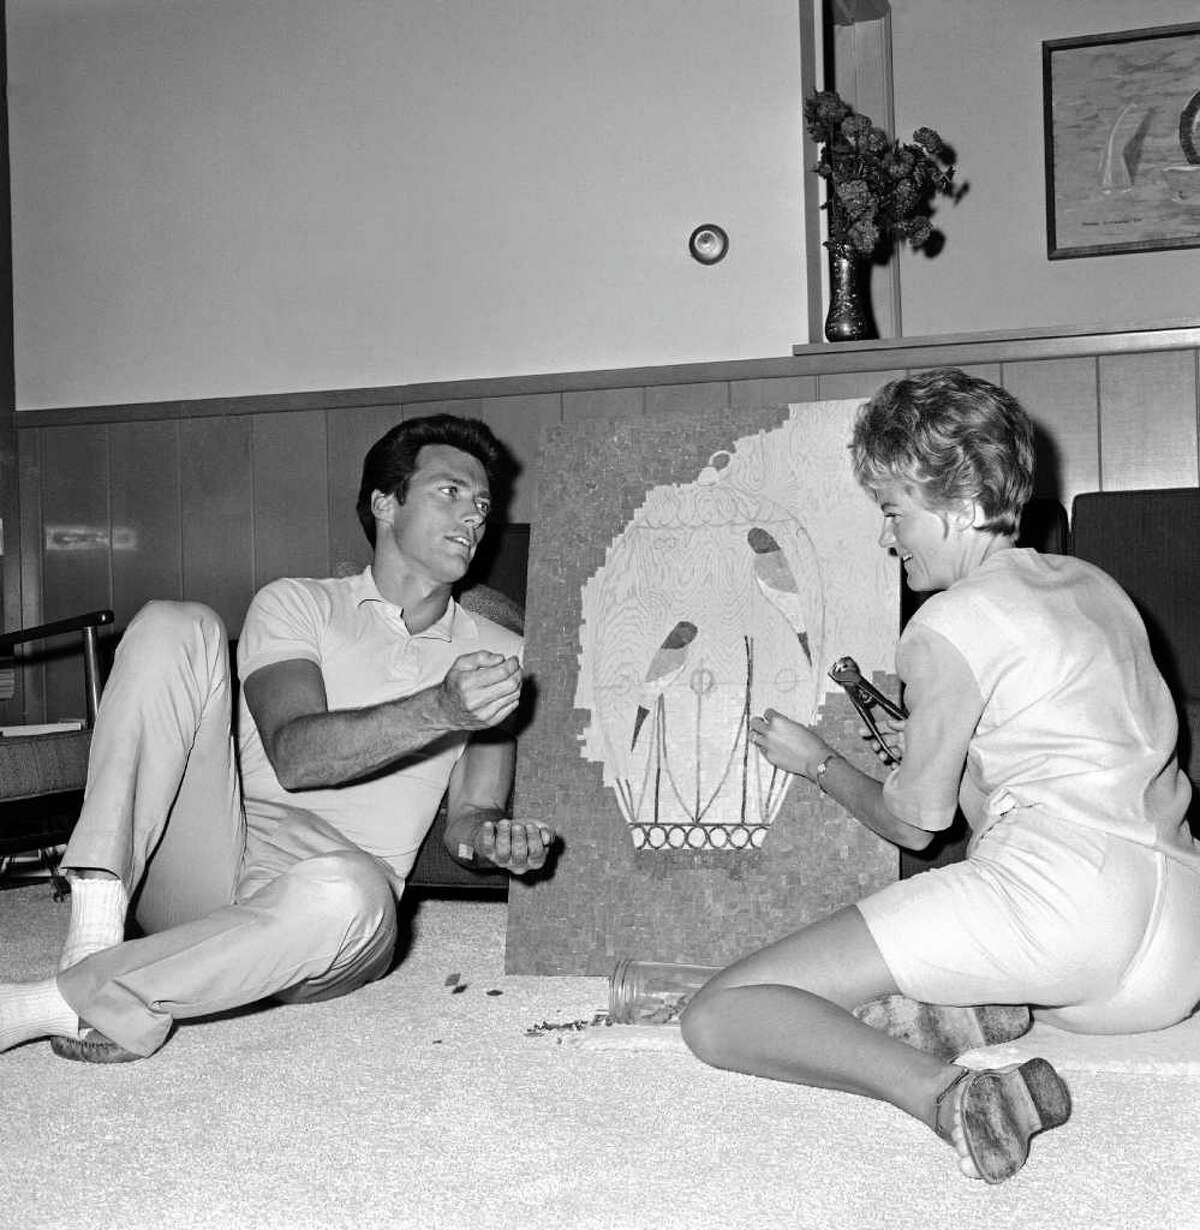 A helpful male, actor Clint Eastwood keeps the bits of tile handy for a mosaic his wife Margaret is making, in their home at Hollywood Hills, Calif, Oct. 25, 1962. Clint finds the floor a nice spot to rest as he helps.